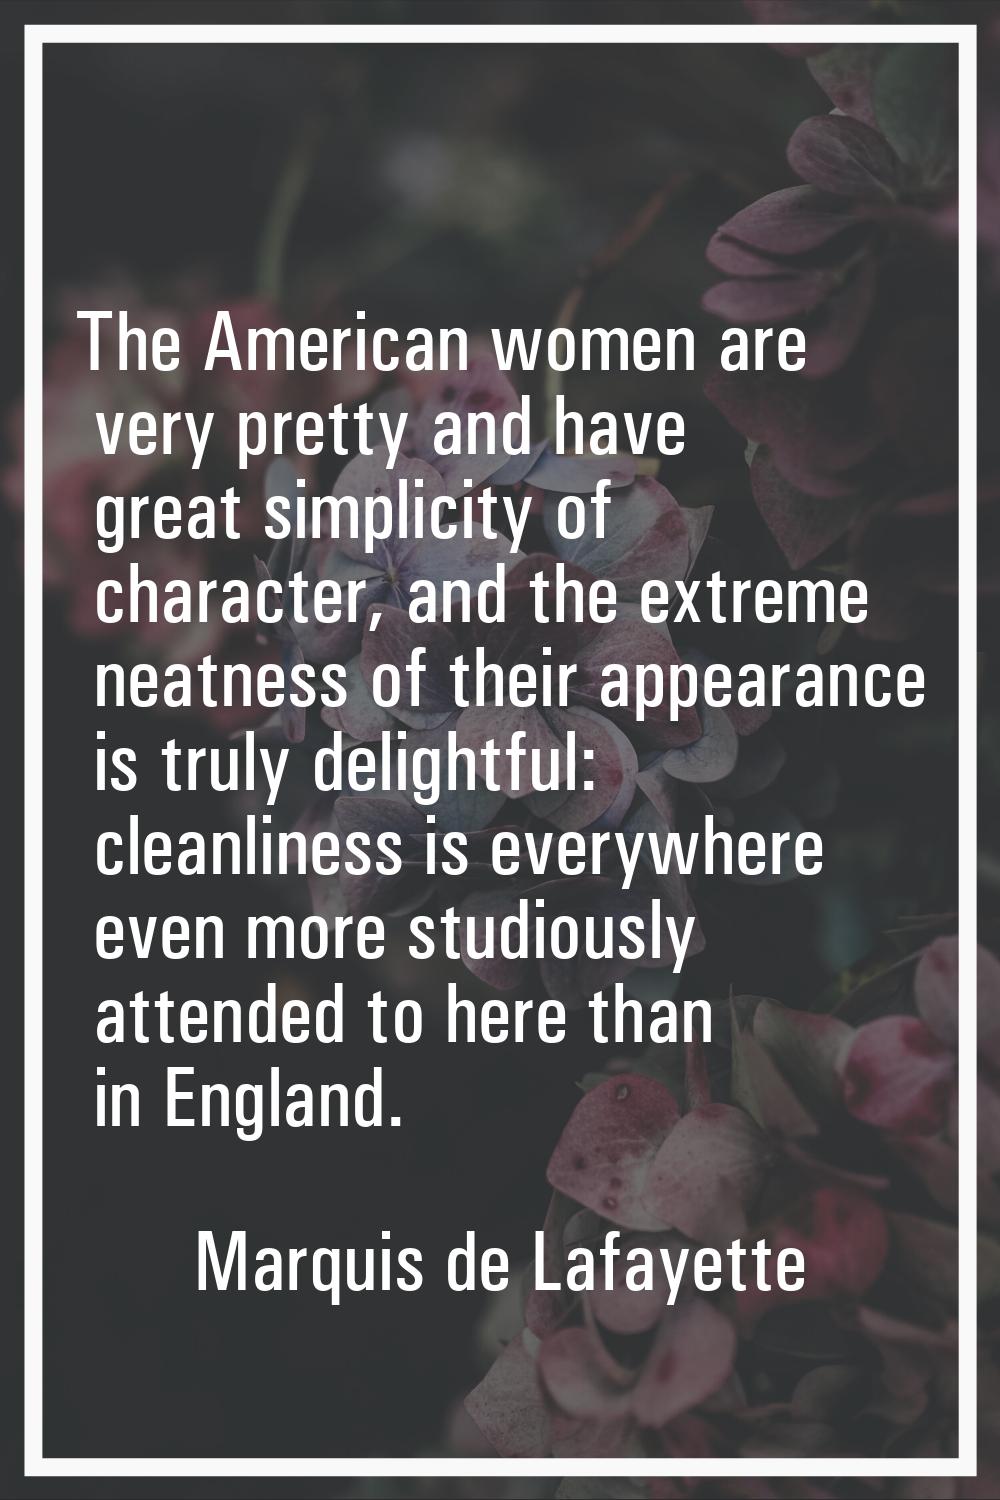 The American women are very pretty and have great simplicity of character, and the extreme neatness